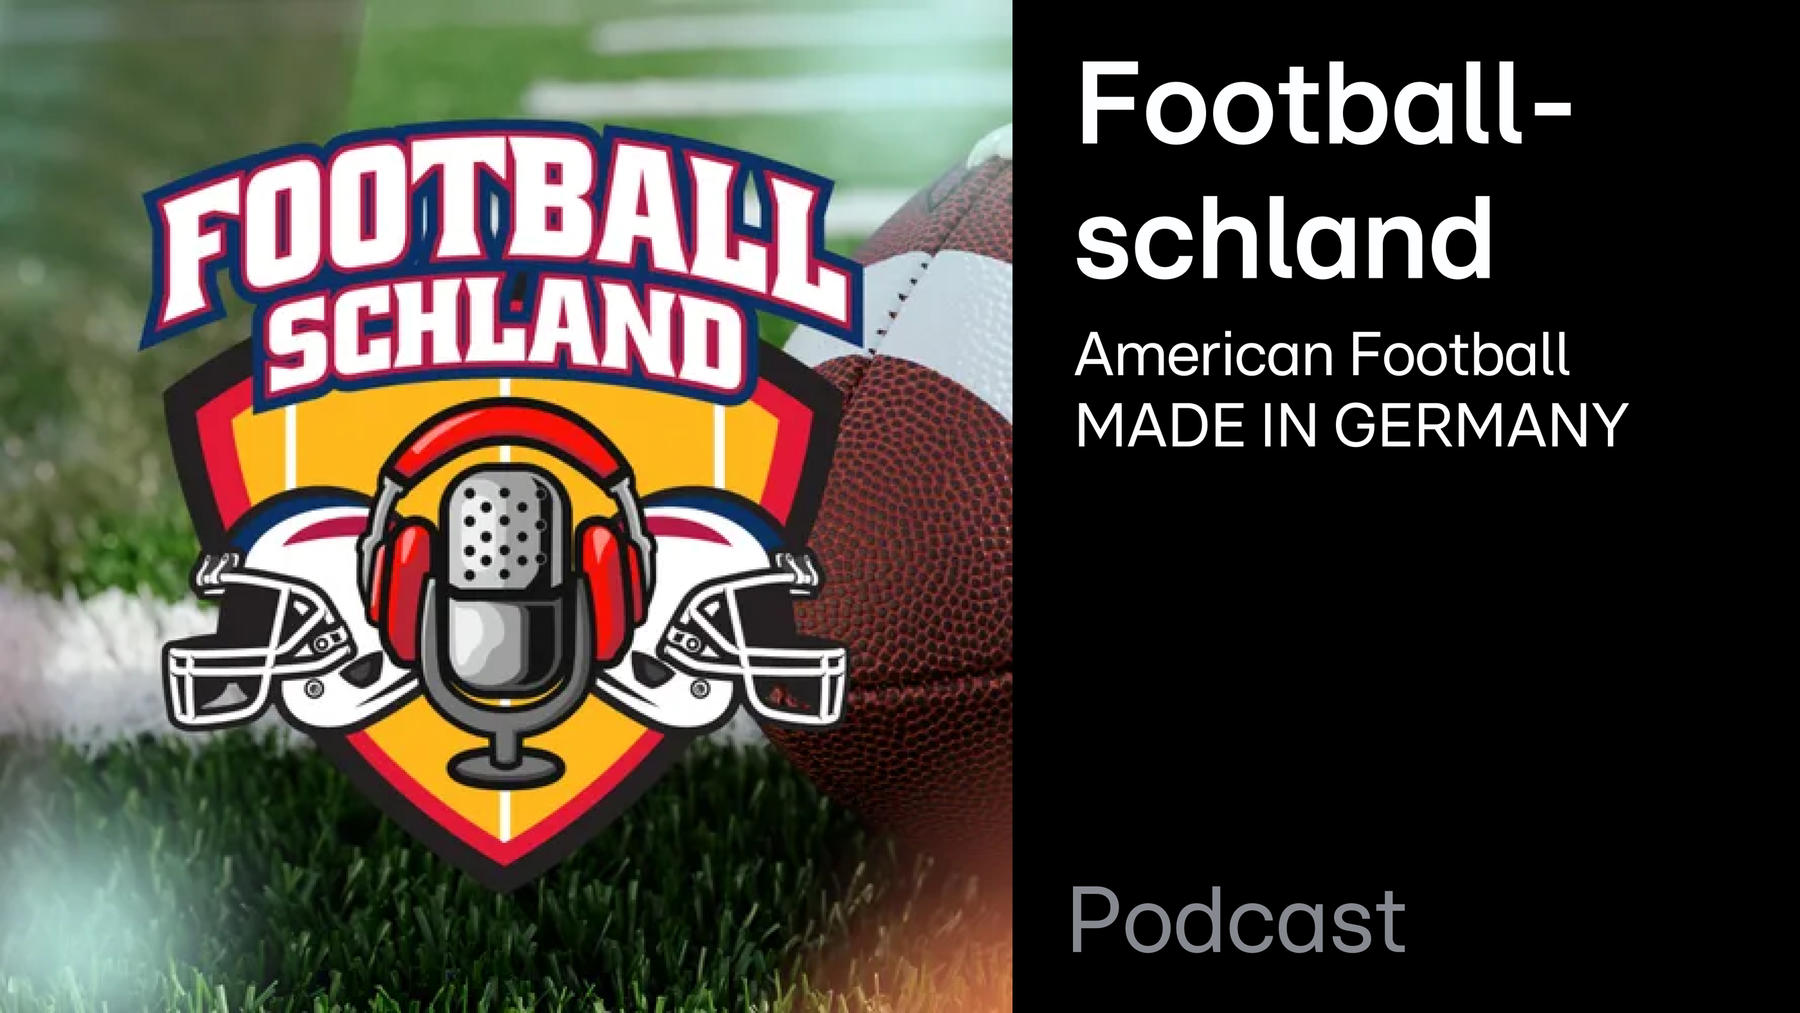 Podcast: Footballschland | American Football MADE IN GERMANY